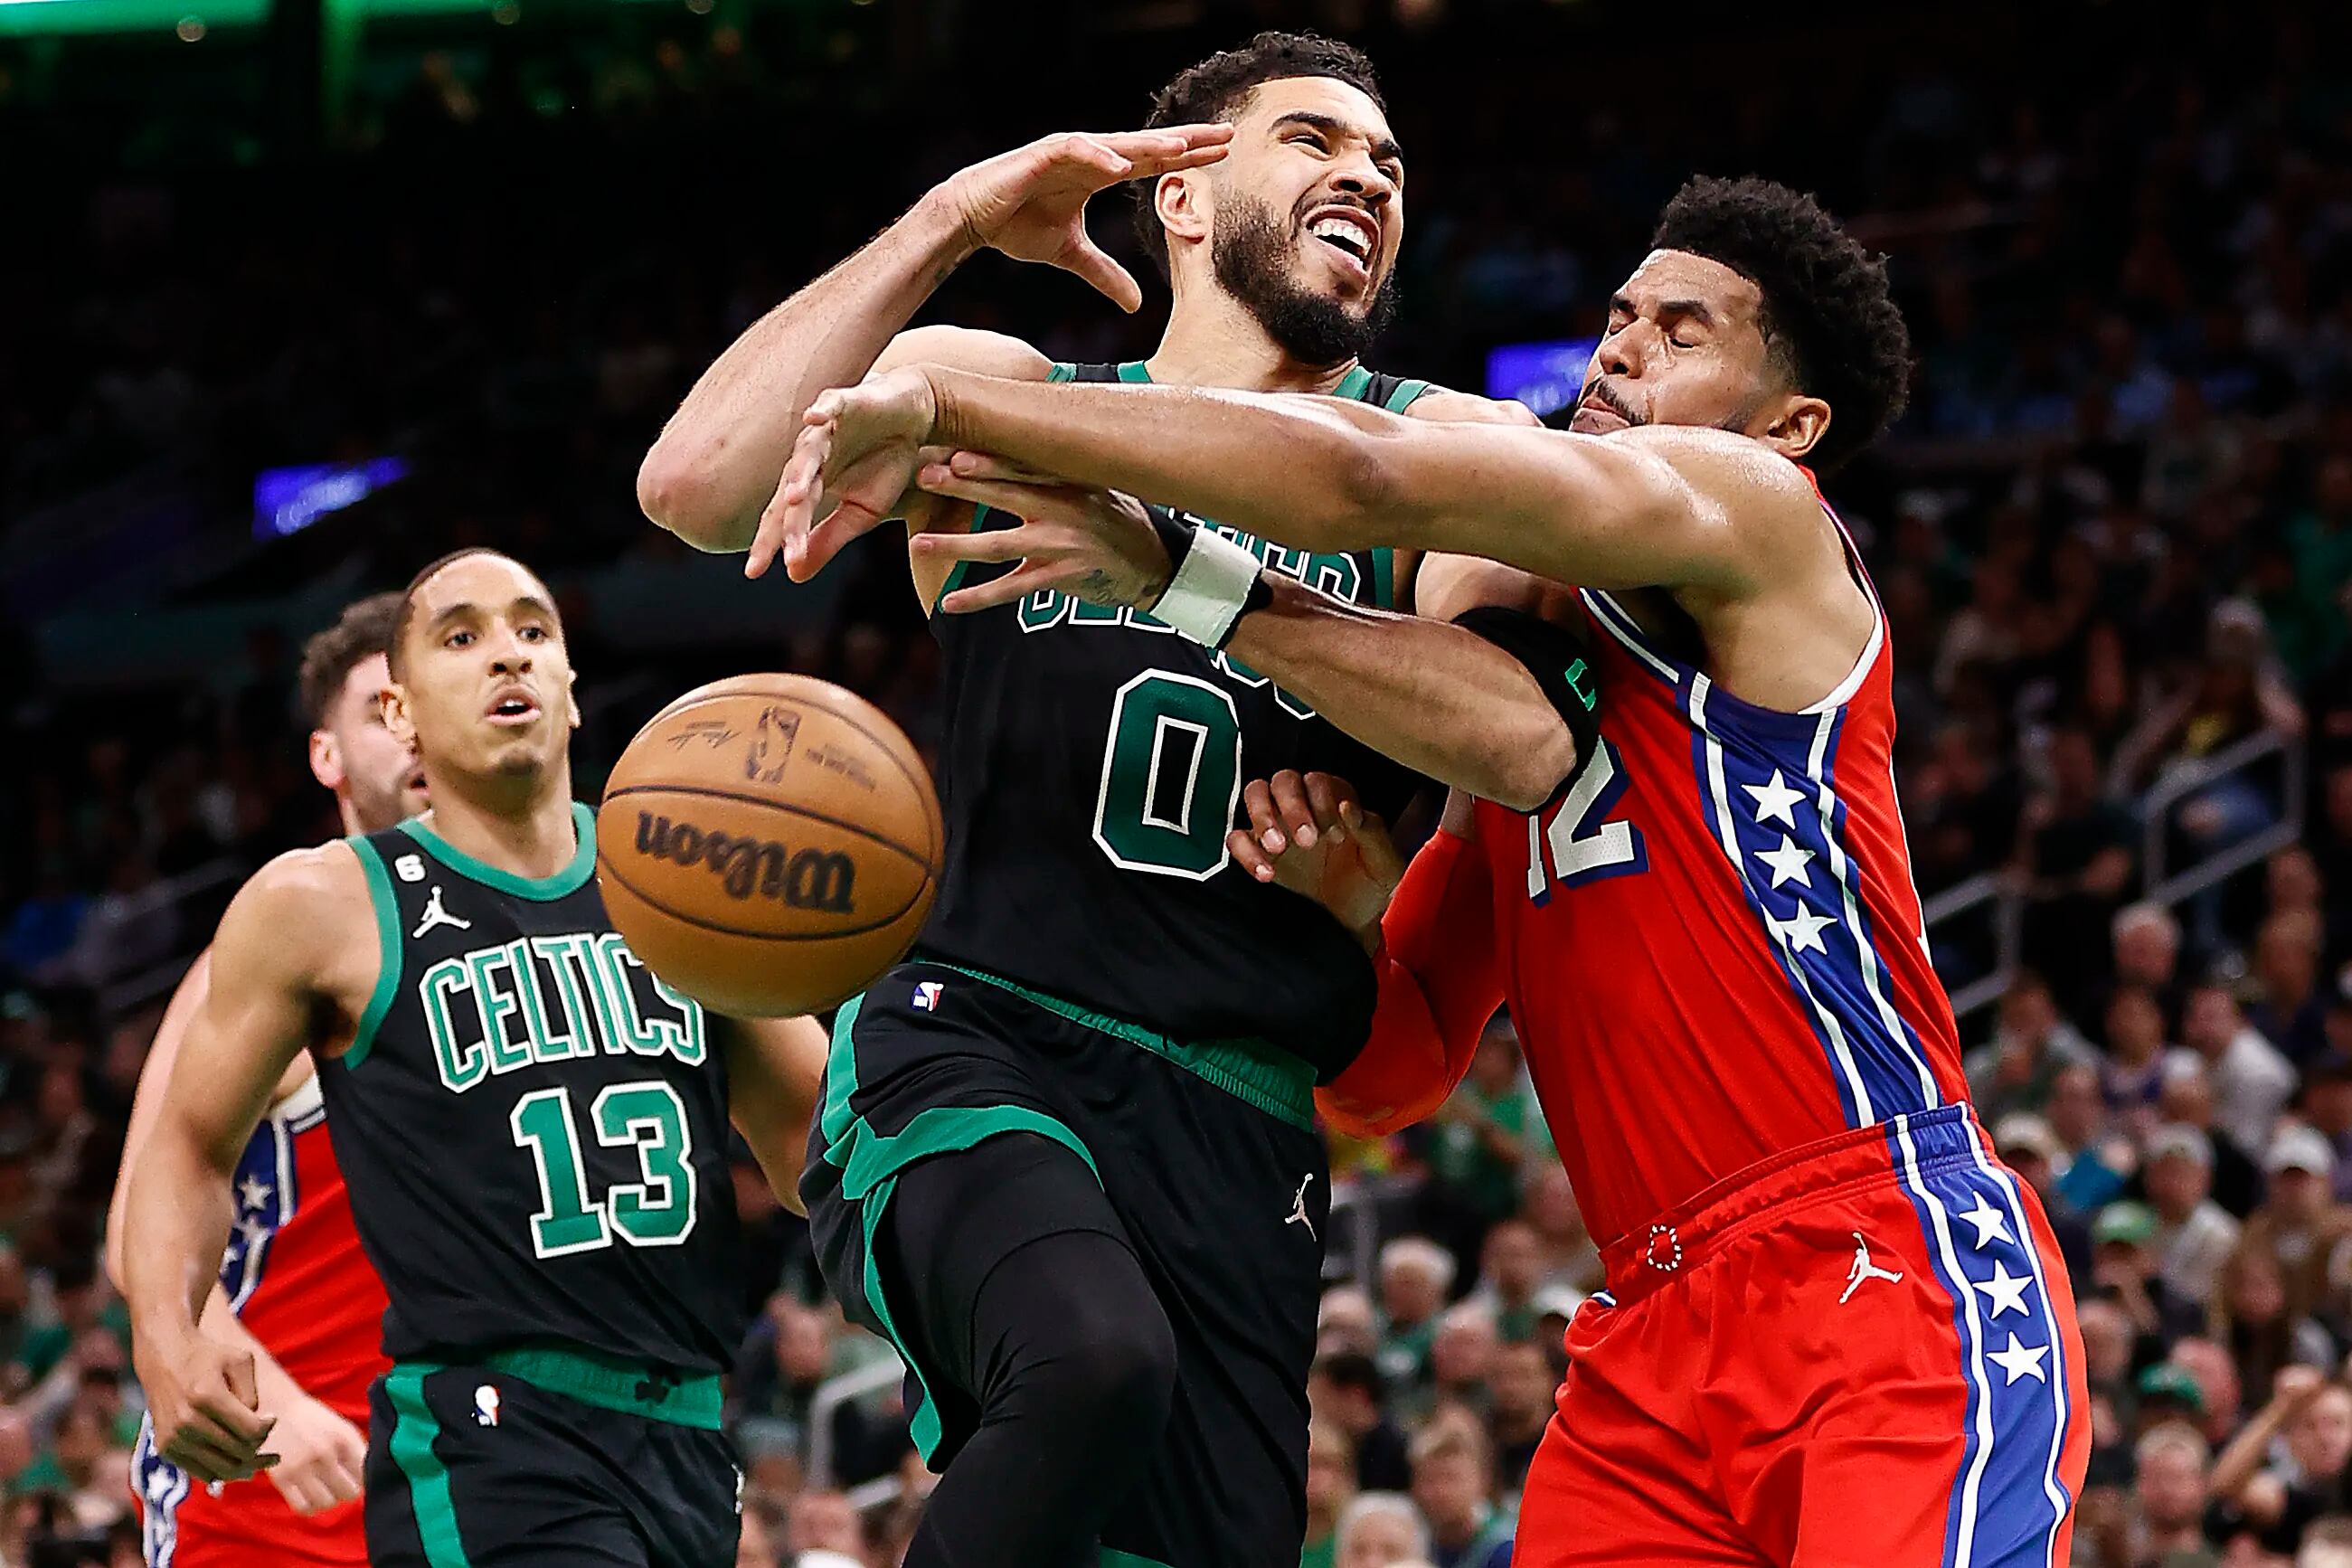 Celtics' youth prevails over 76ers' to take Game 1